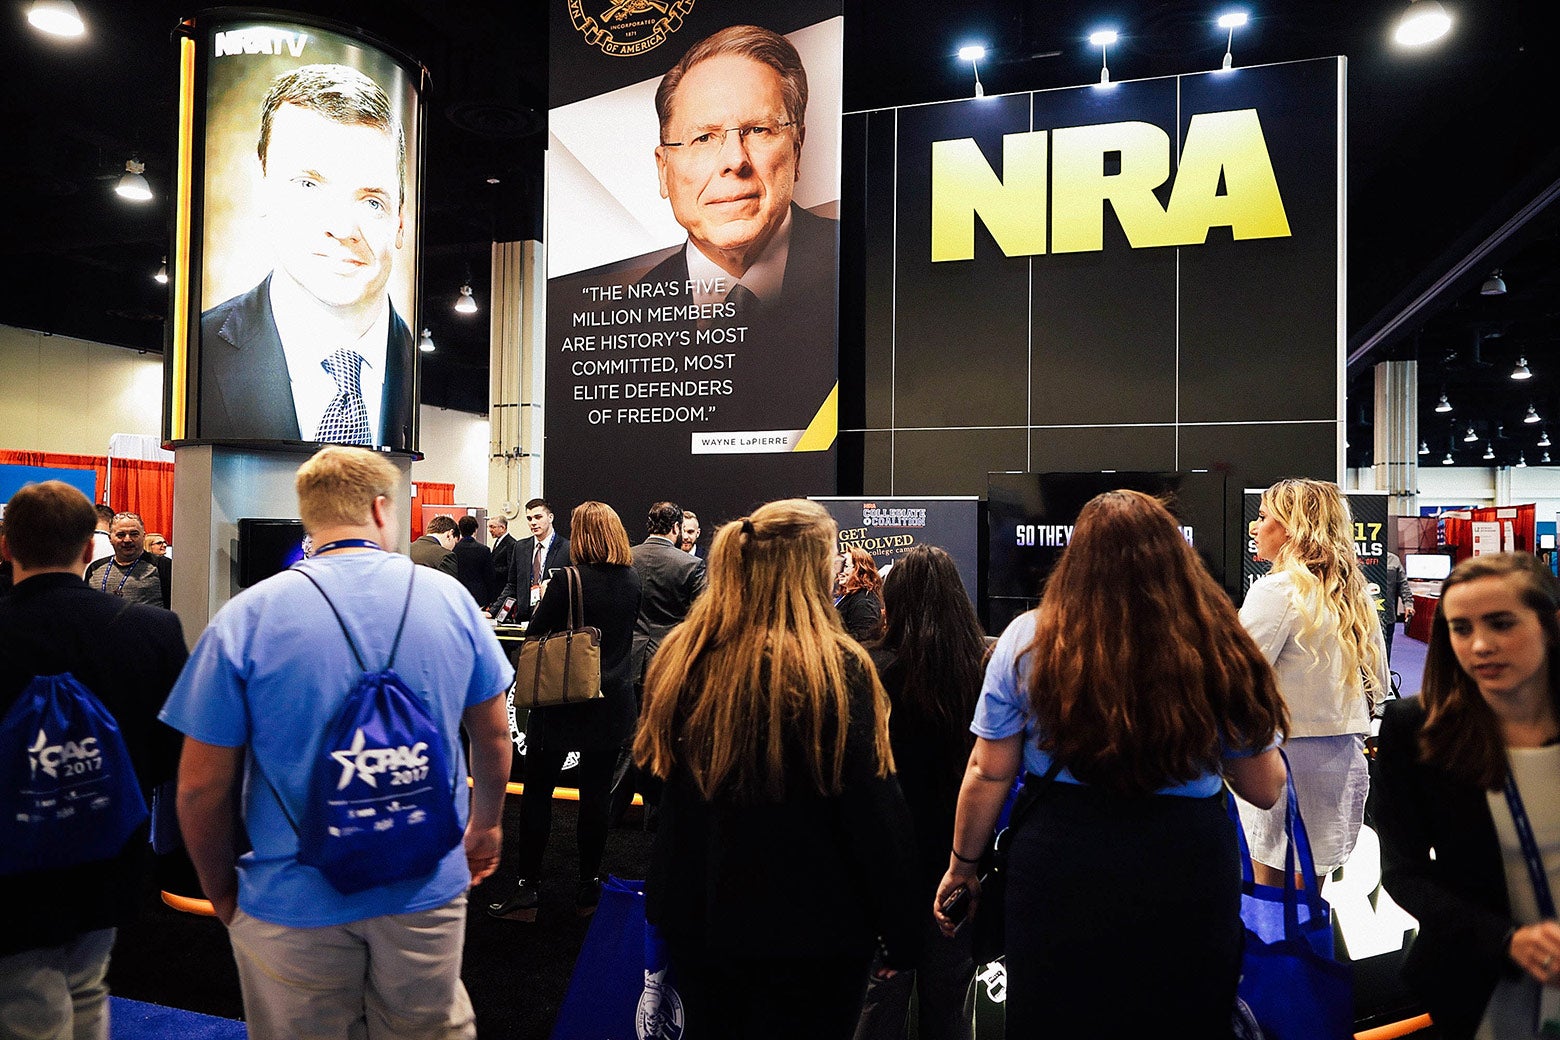 National Rifle Association CEO Wayne LaPierre’s image floats above the NRA booth during the first day of the Conservative Political Action Conference at the Gaylord National Resort and Convention Center on Feb. 23 in National Harbor, Maryland.